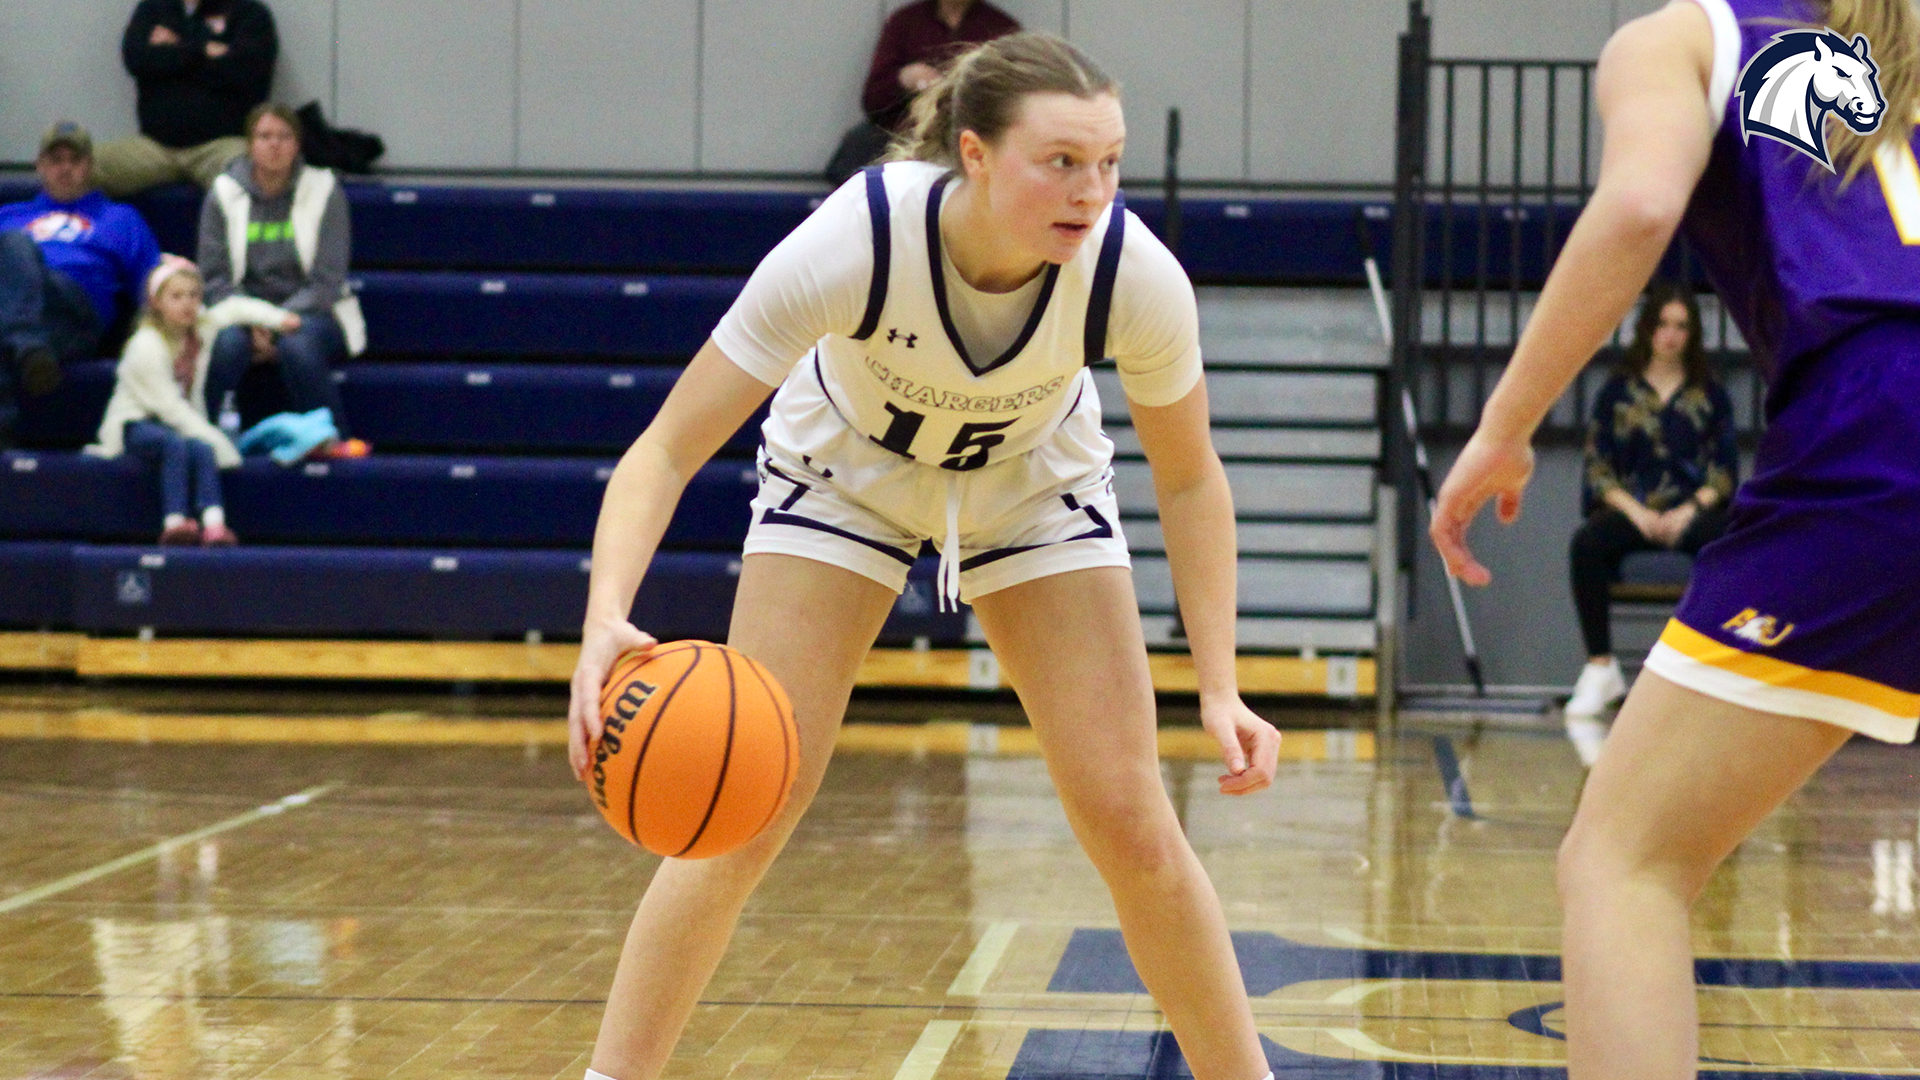 Chargers fall to top-ranked Ashland in road defeat, 83-59